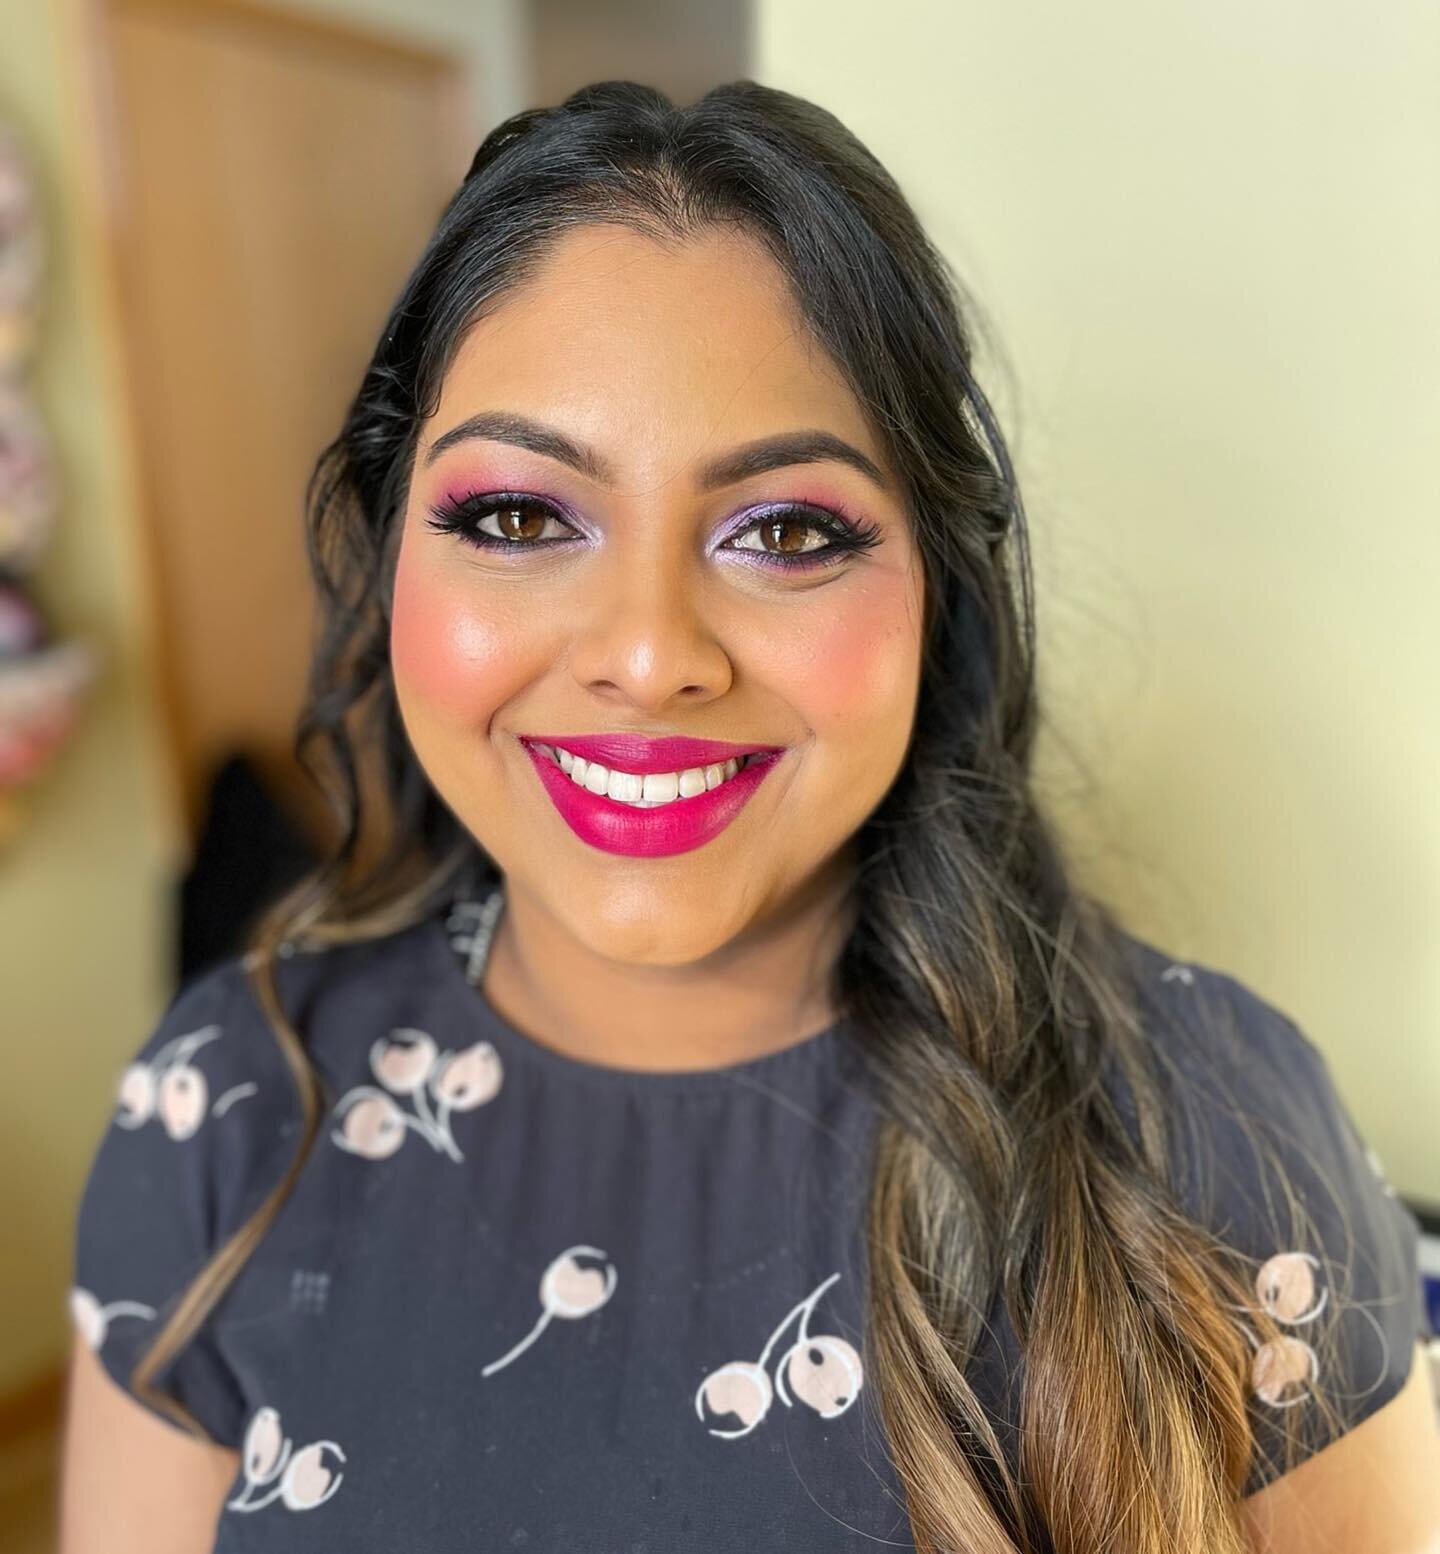 It was fun recreating one of my looks on someone else today. 💕💜
.
.
.
#mnmakeupartist #mnbridalmakeupartist #lakevillemakeup #lakevillemakeupartist  #twincitiesmakeupartist #minnesotamakeupartist #indianweddingmakeup #indianweddings #guyanese #minn